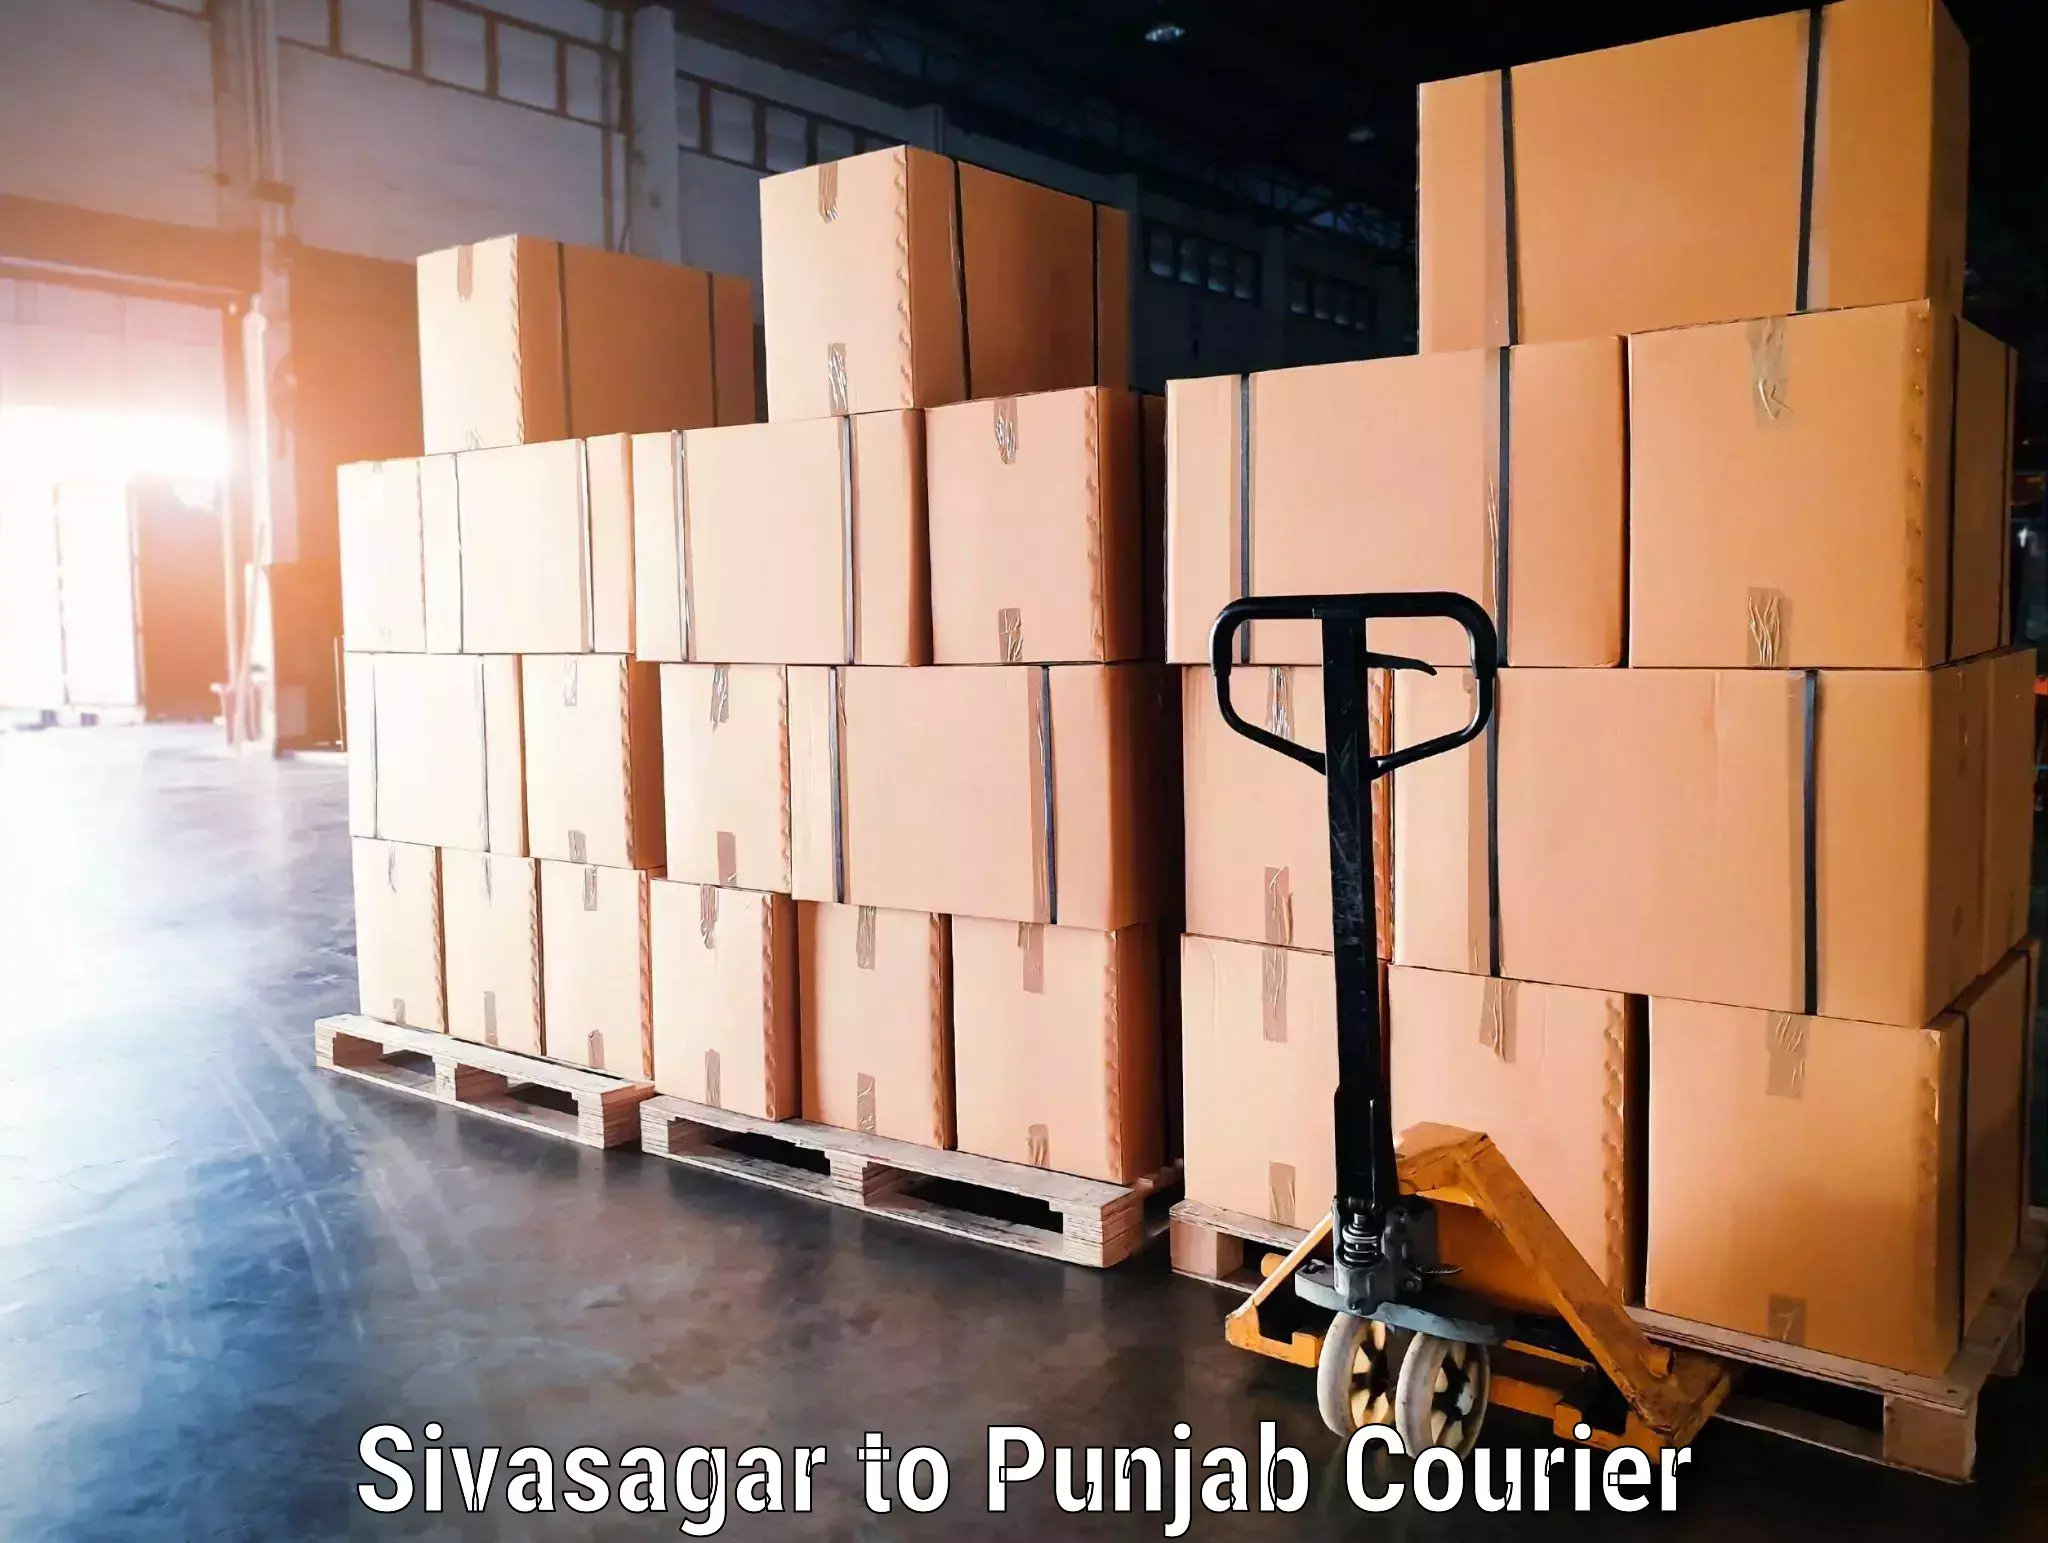 Luggage delivery providers Sivasagar to Goindwal Sahib